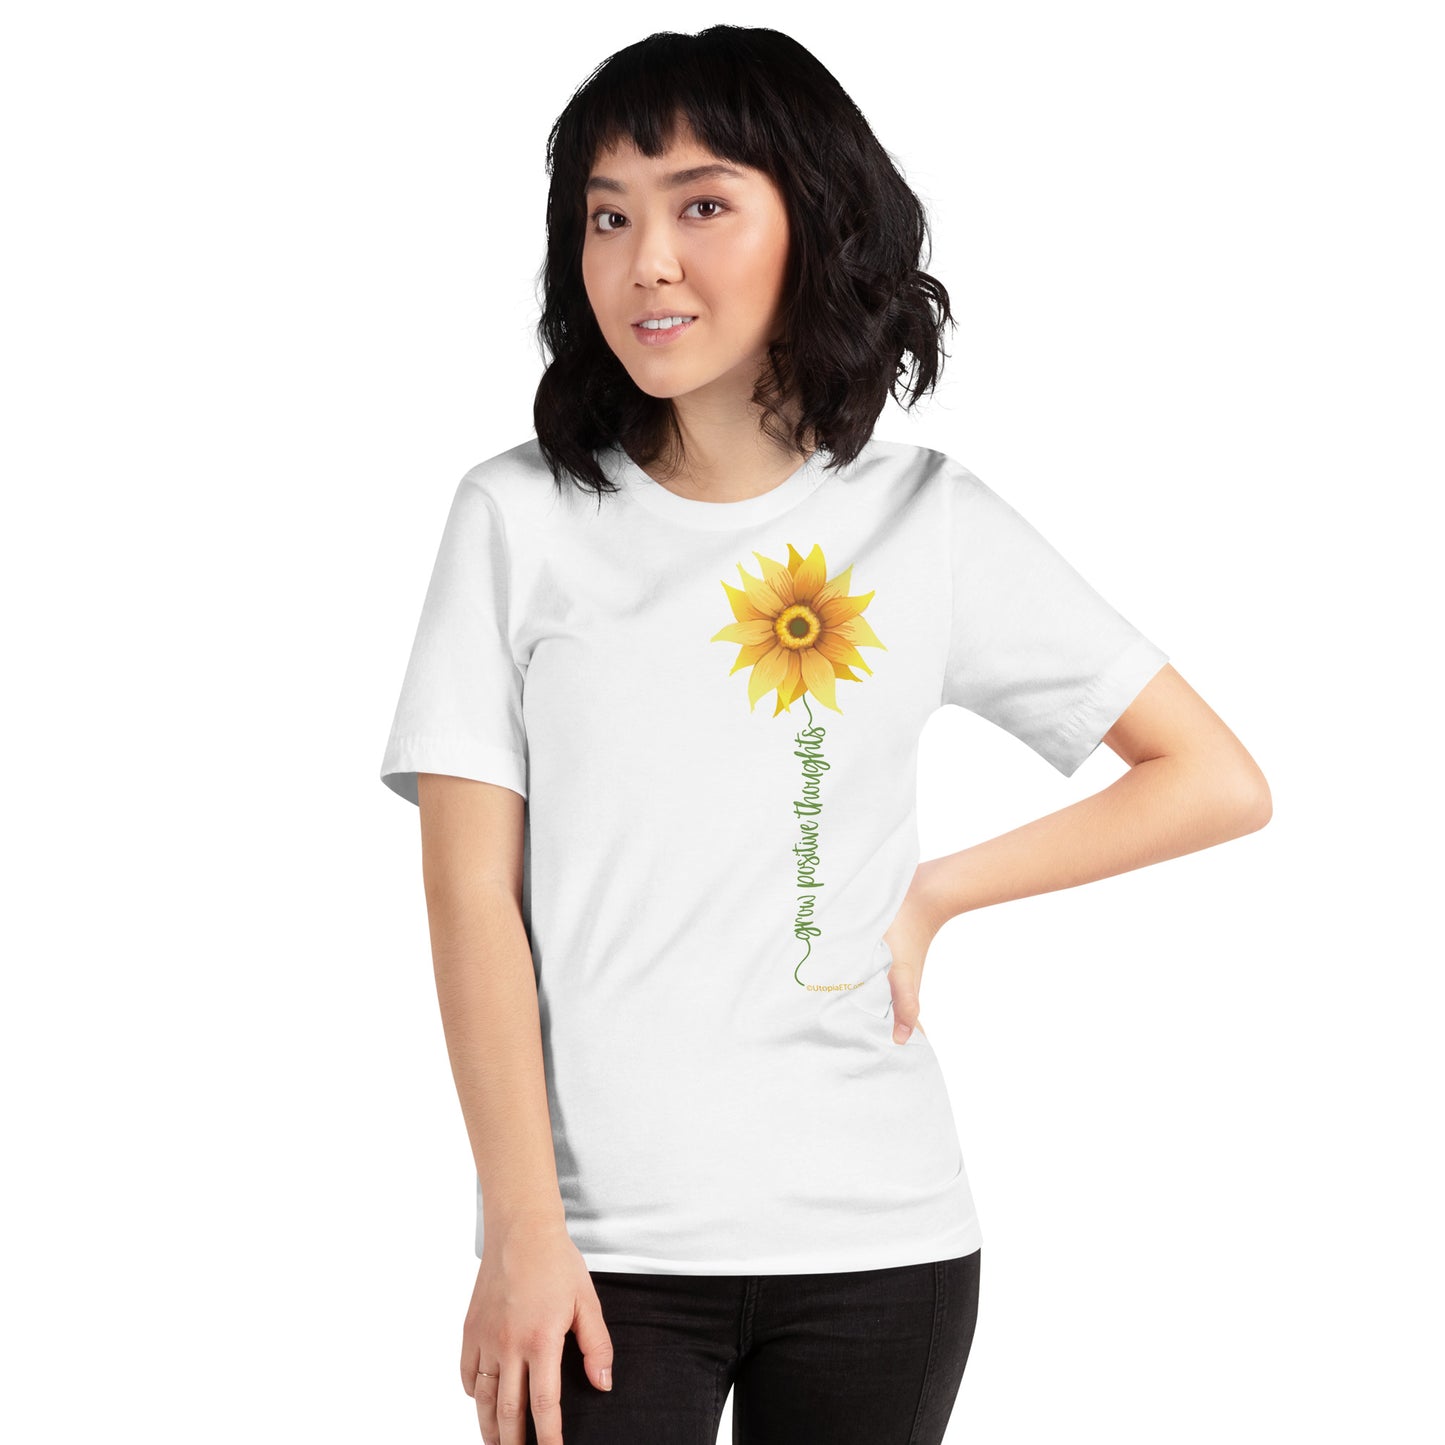 Grow Positive Thoughts Unisex T-shirt